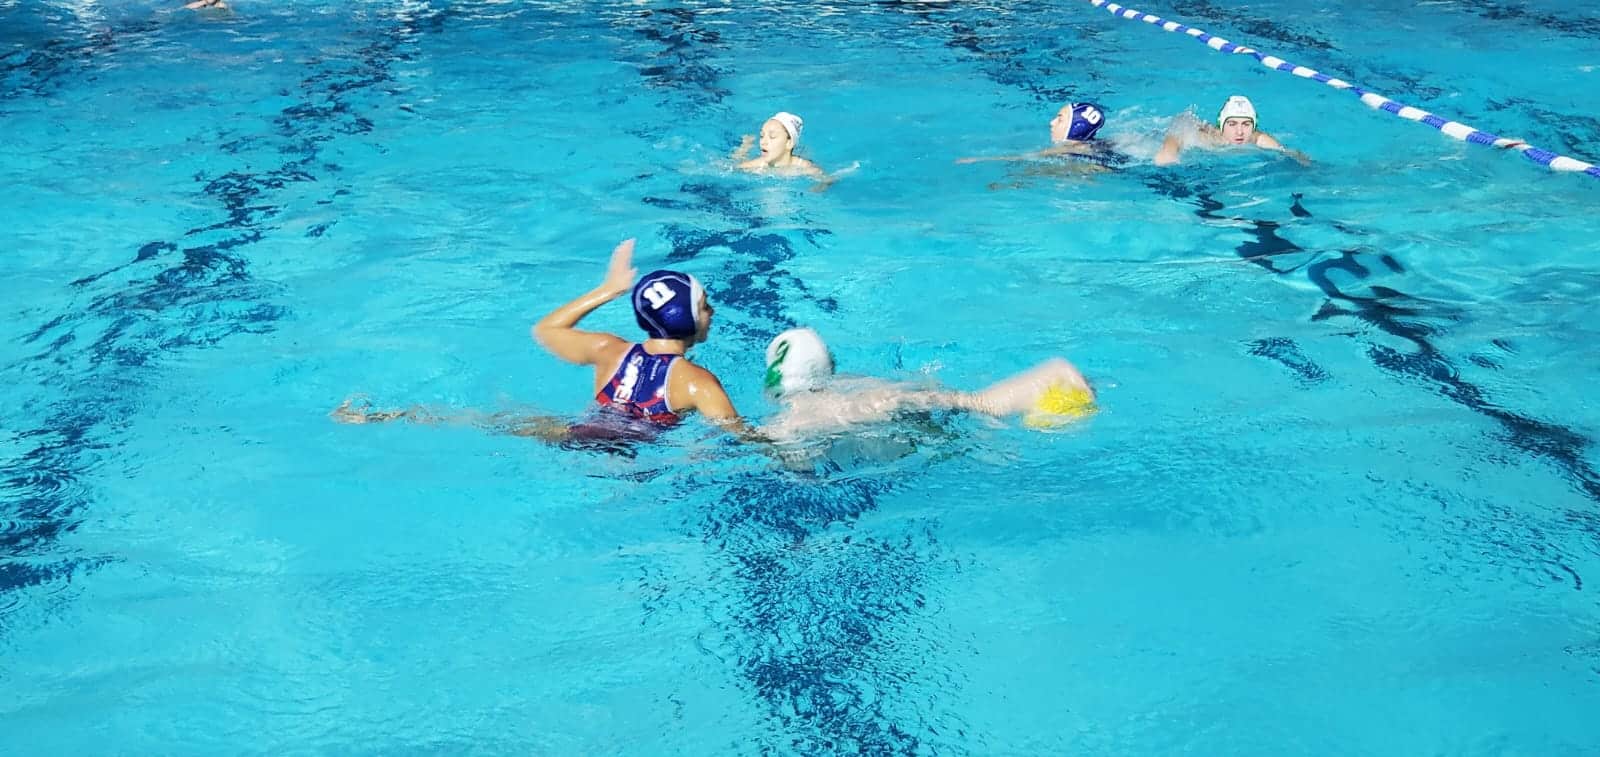 Waterpolo Camp